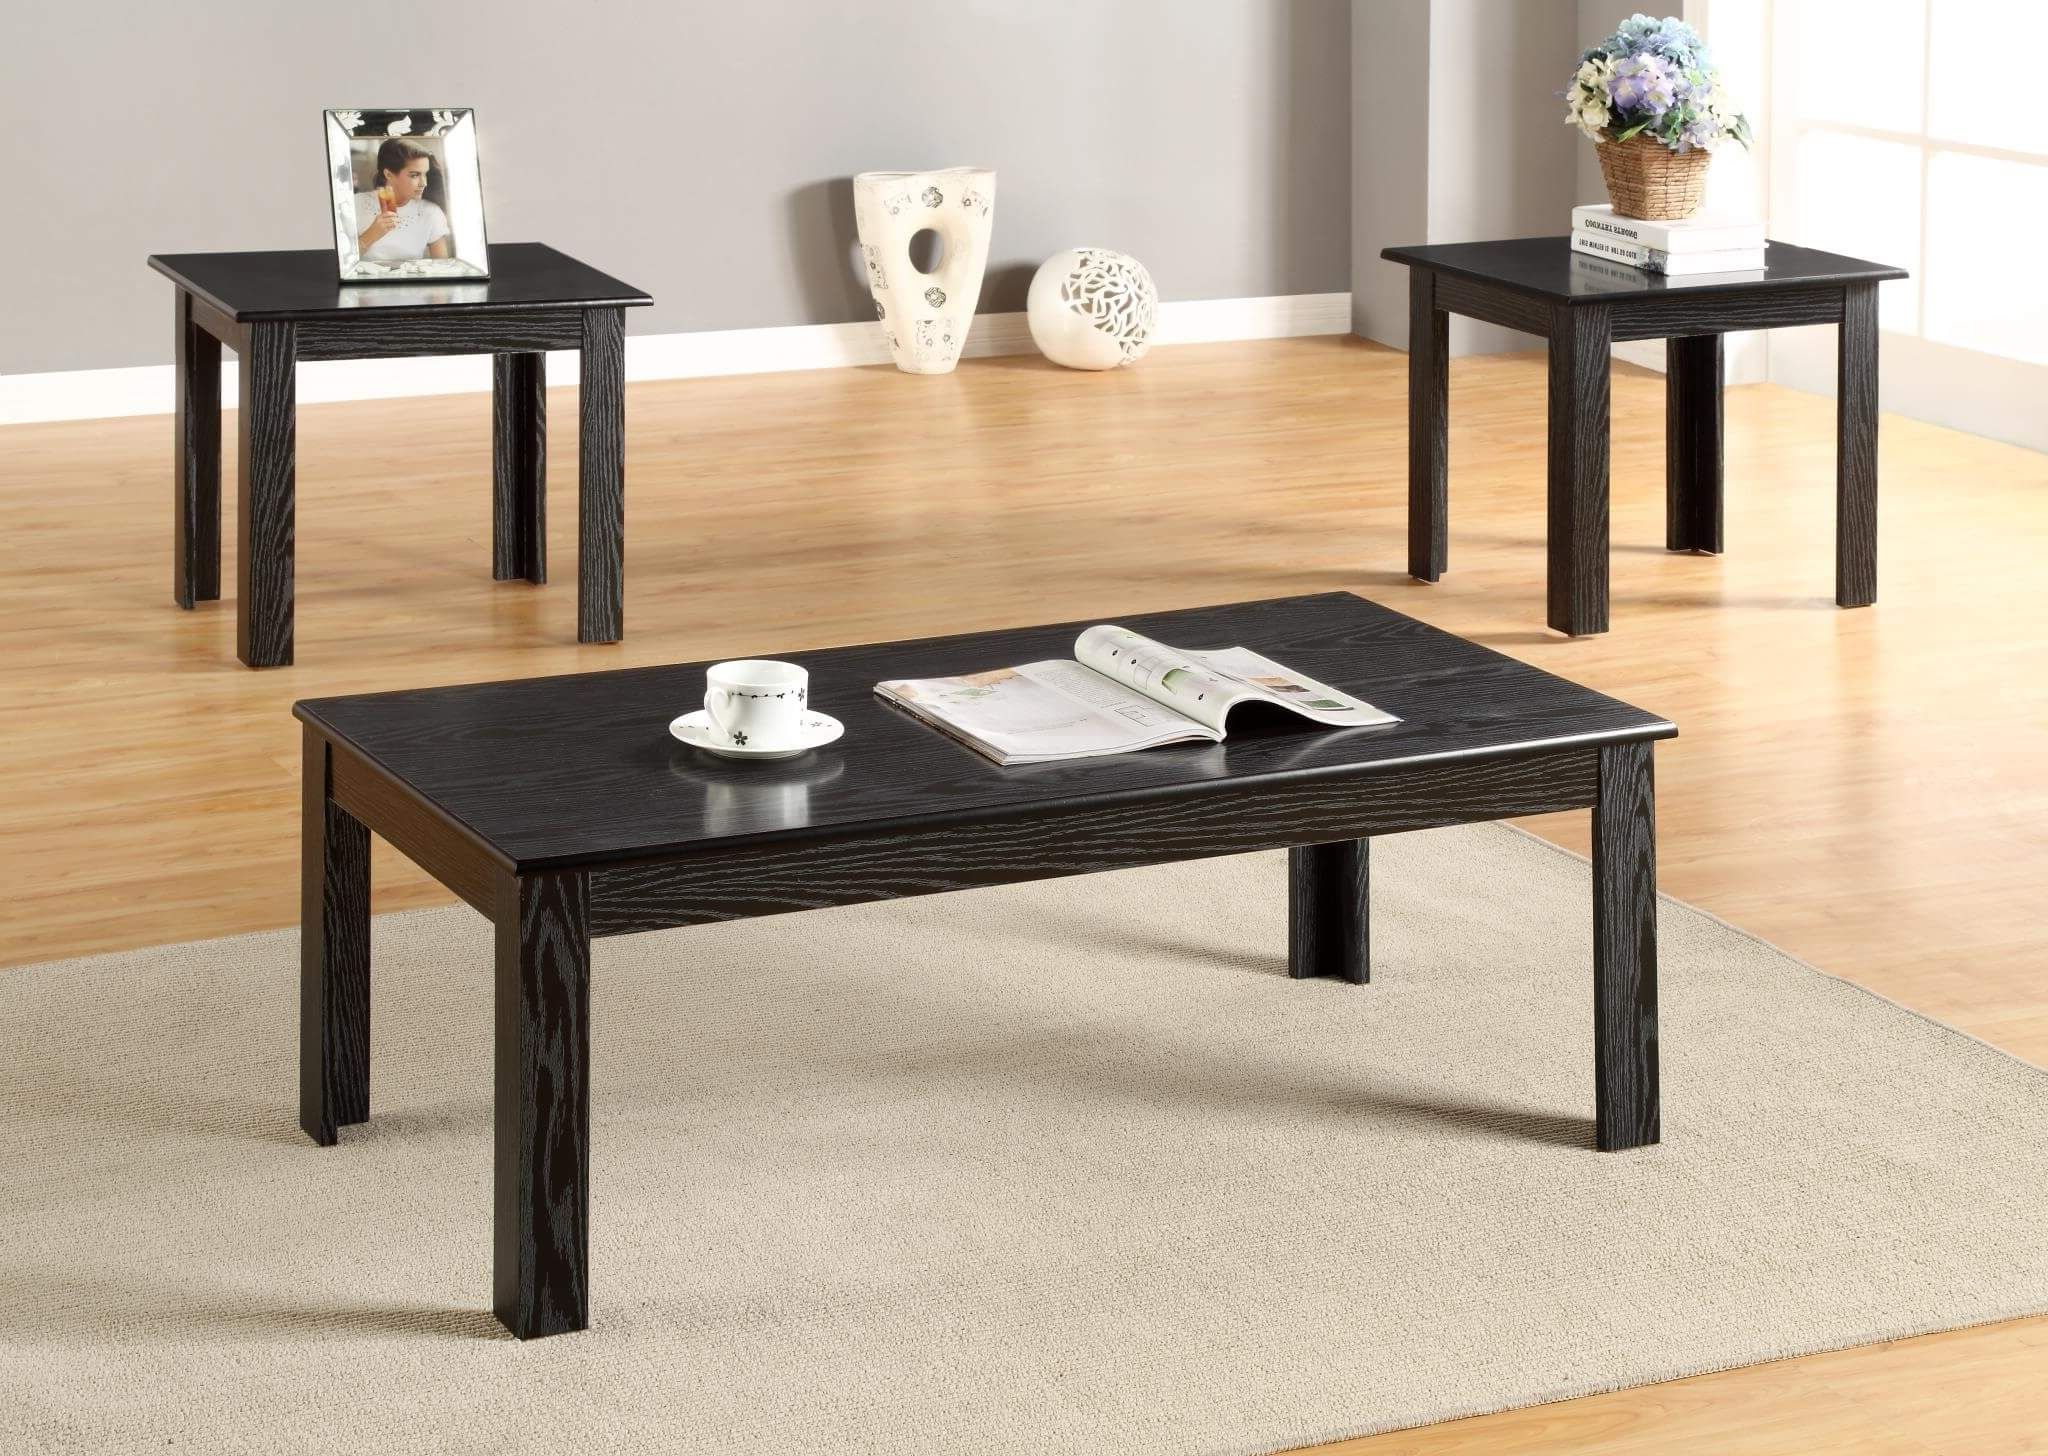 3 Piece Black Coffee And End Table Set (View 12 of 20)